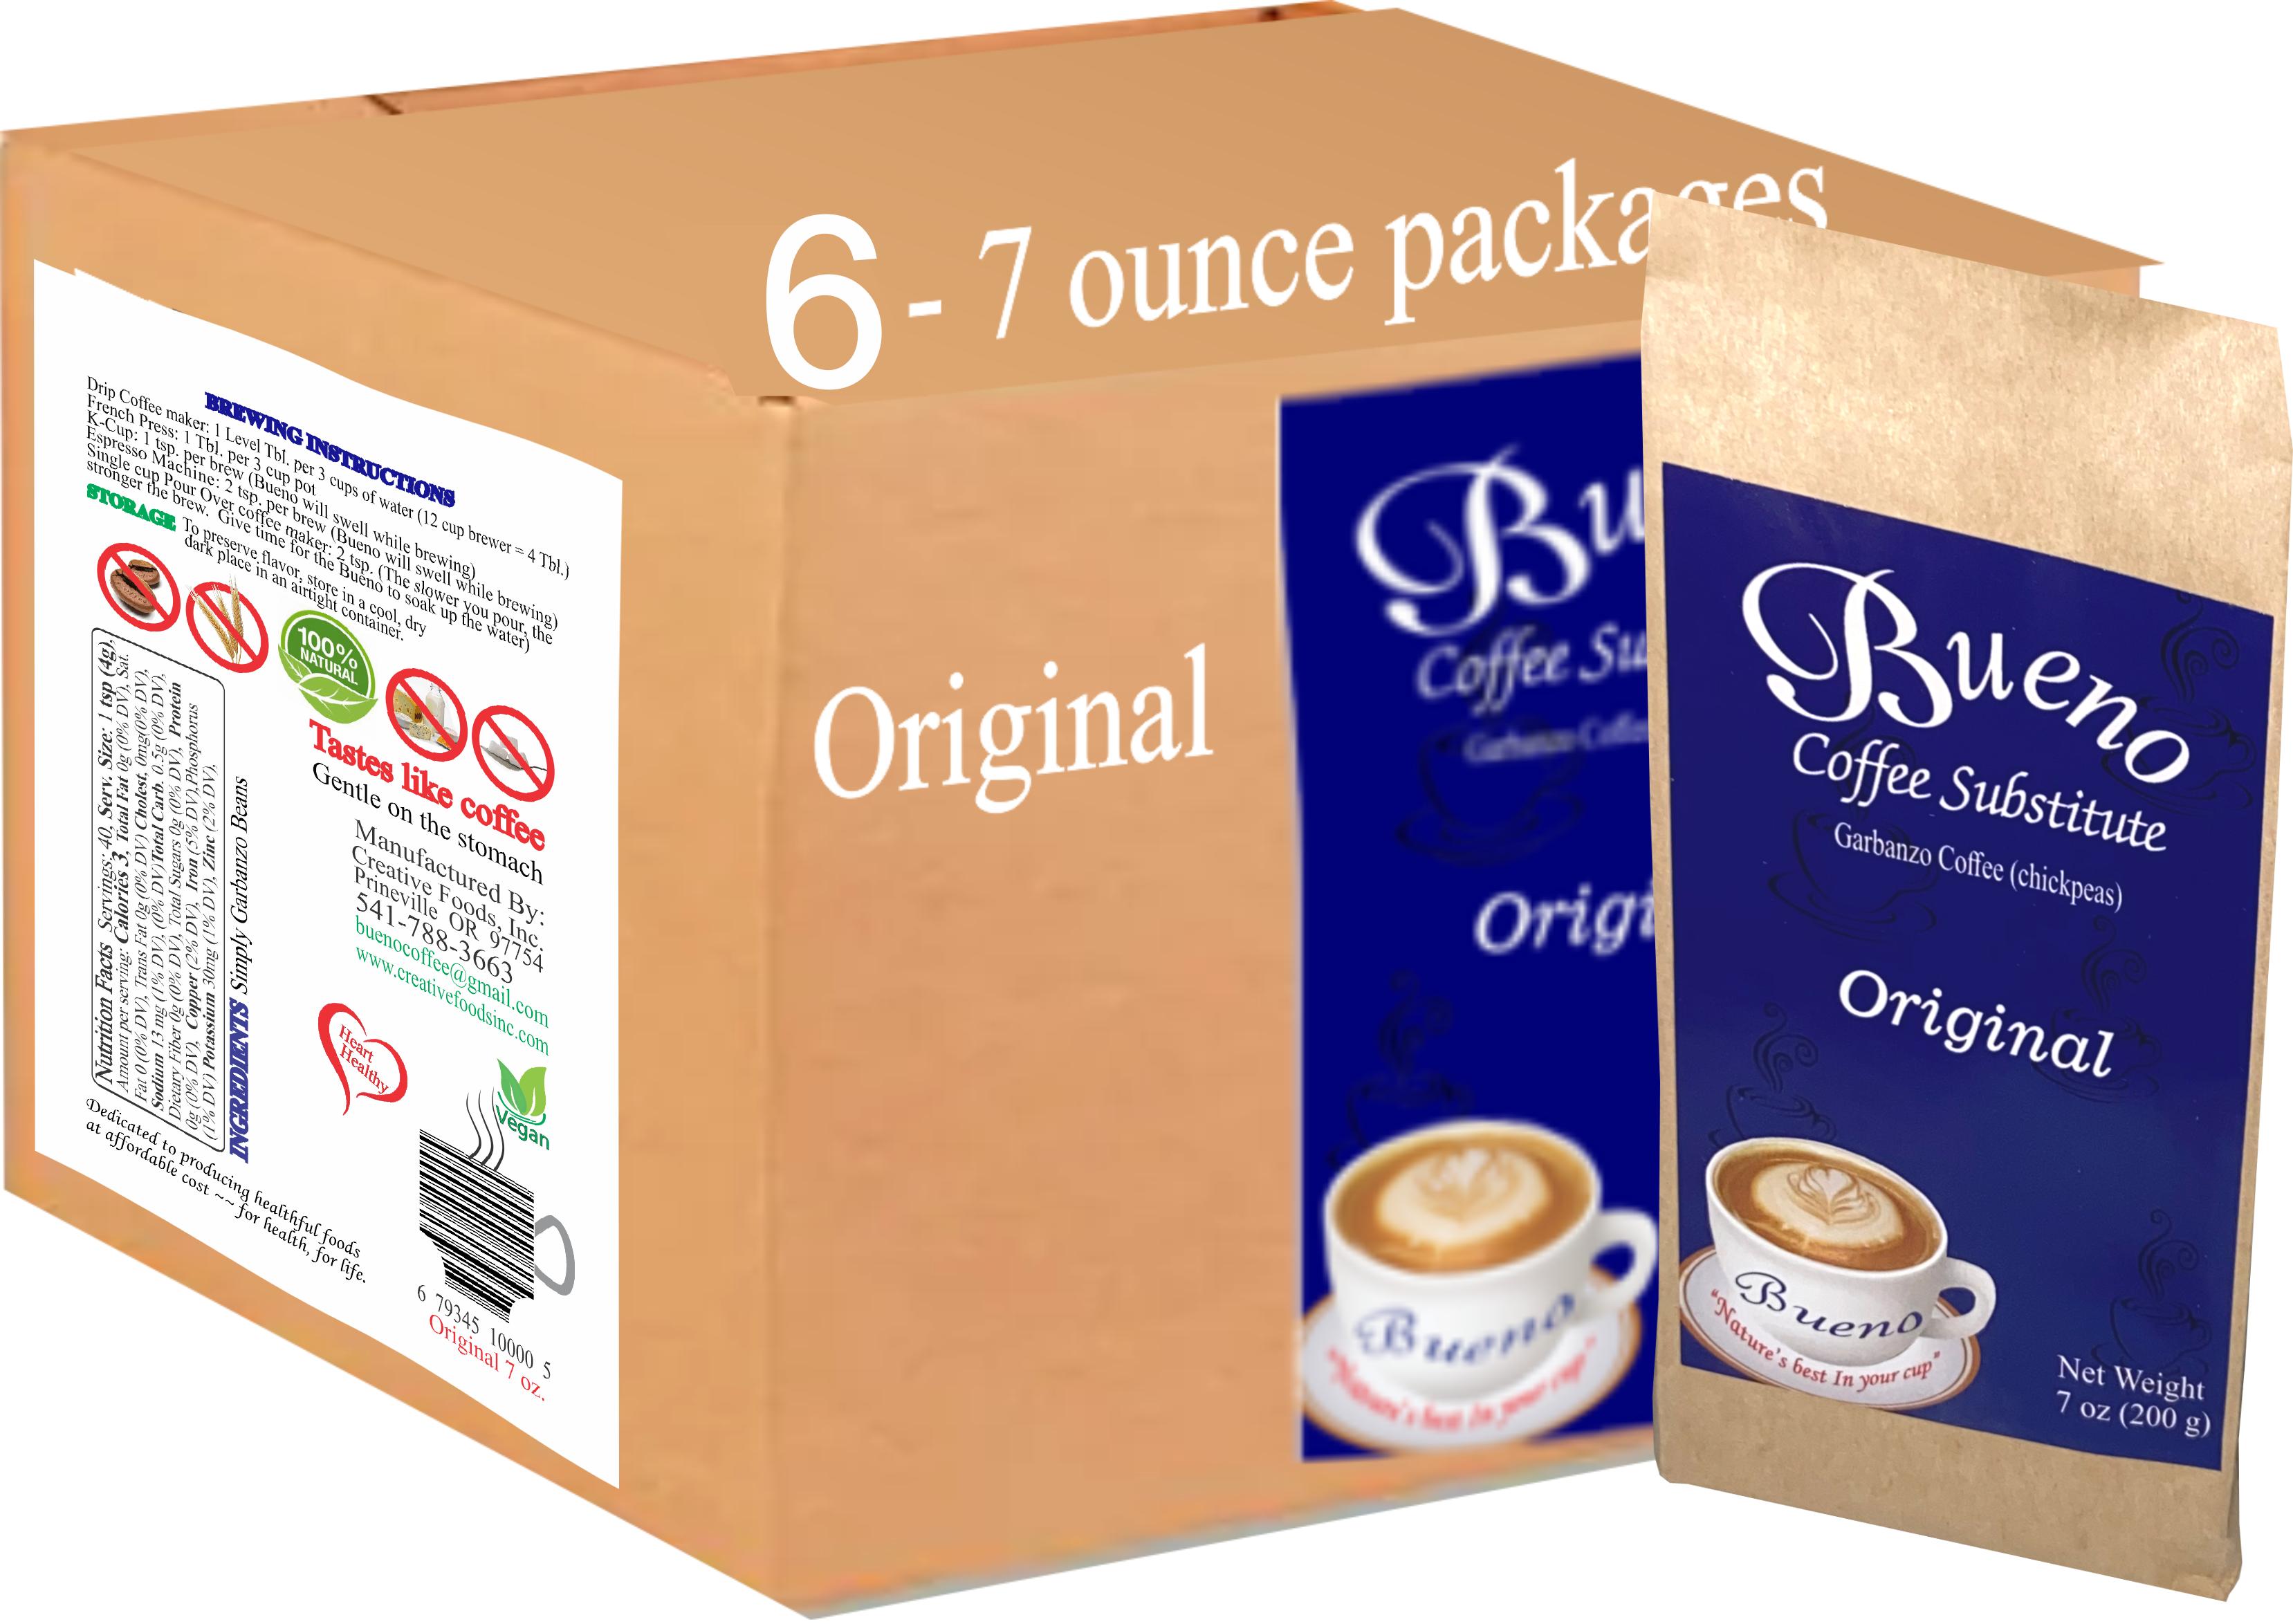 Original 6-7 ounce packages - Click Image to Close